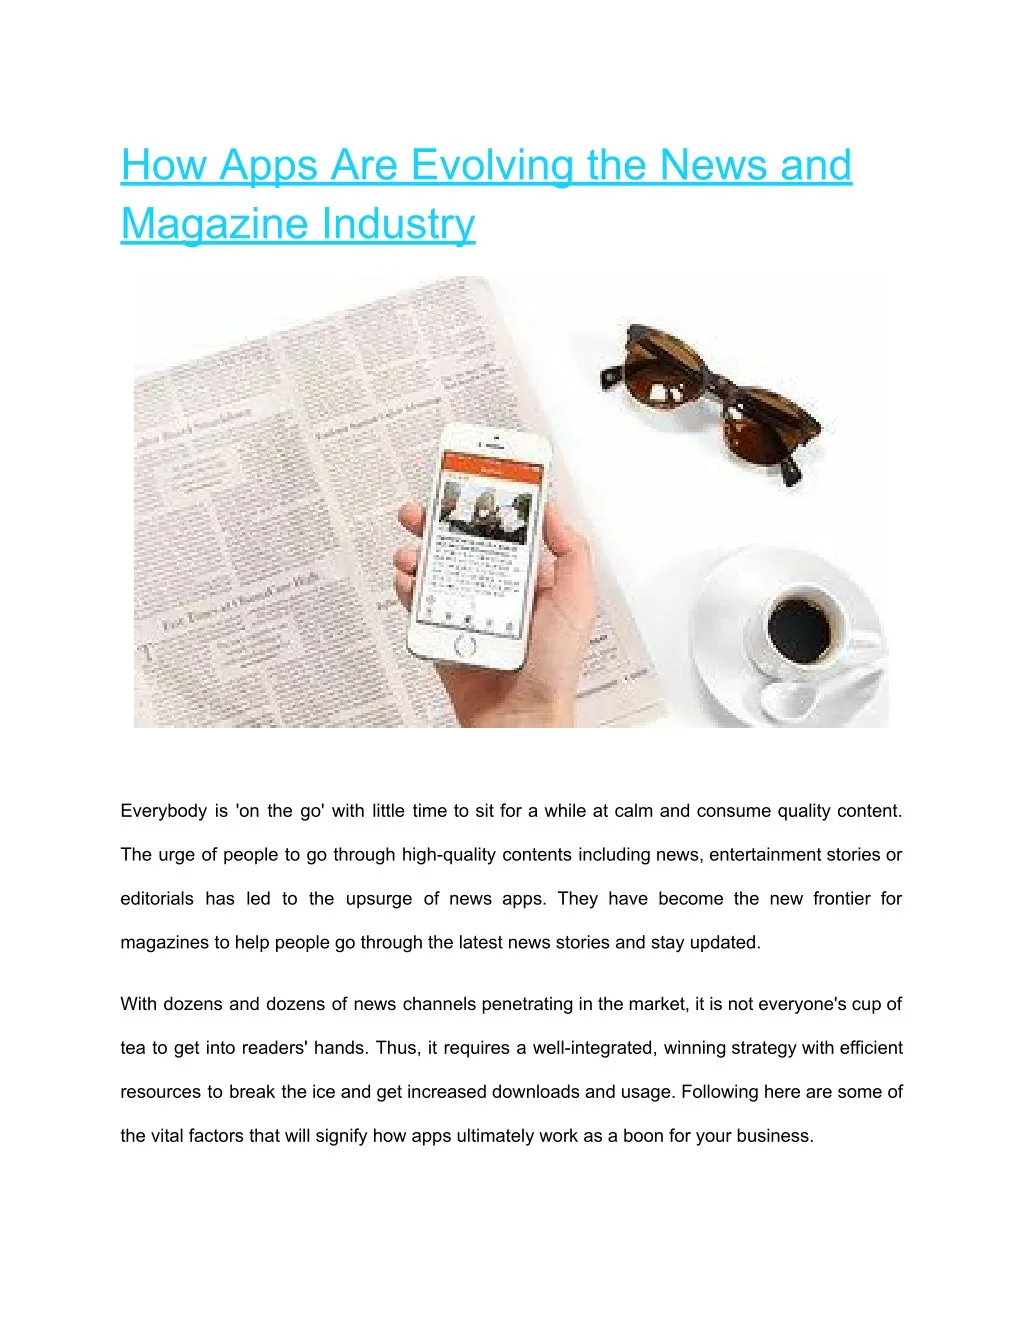 how apps are evolving the news and magazine